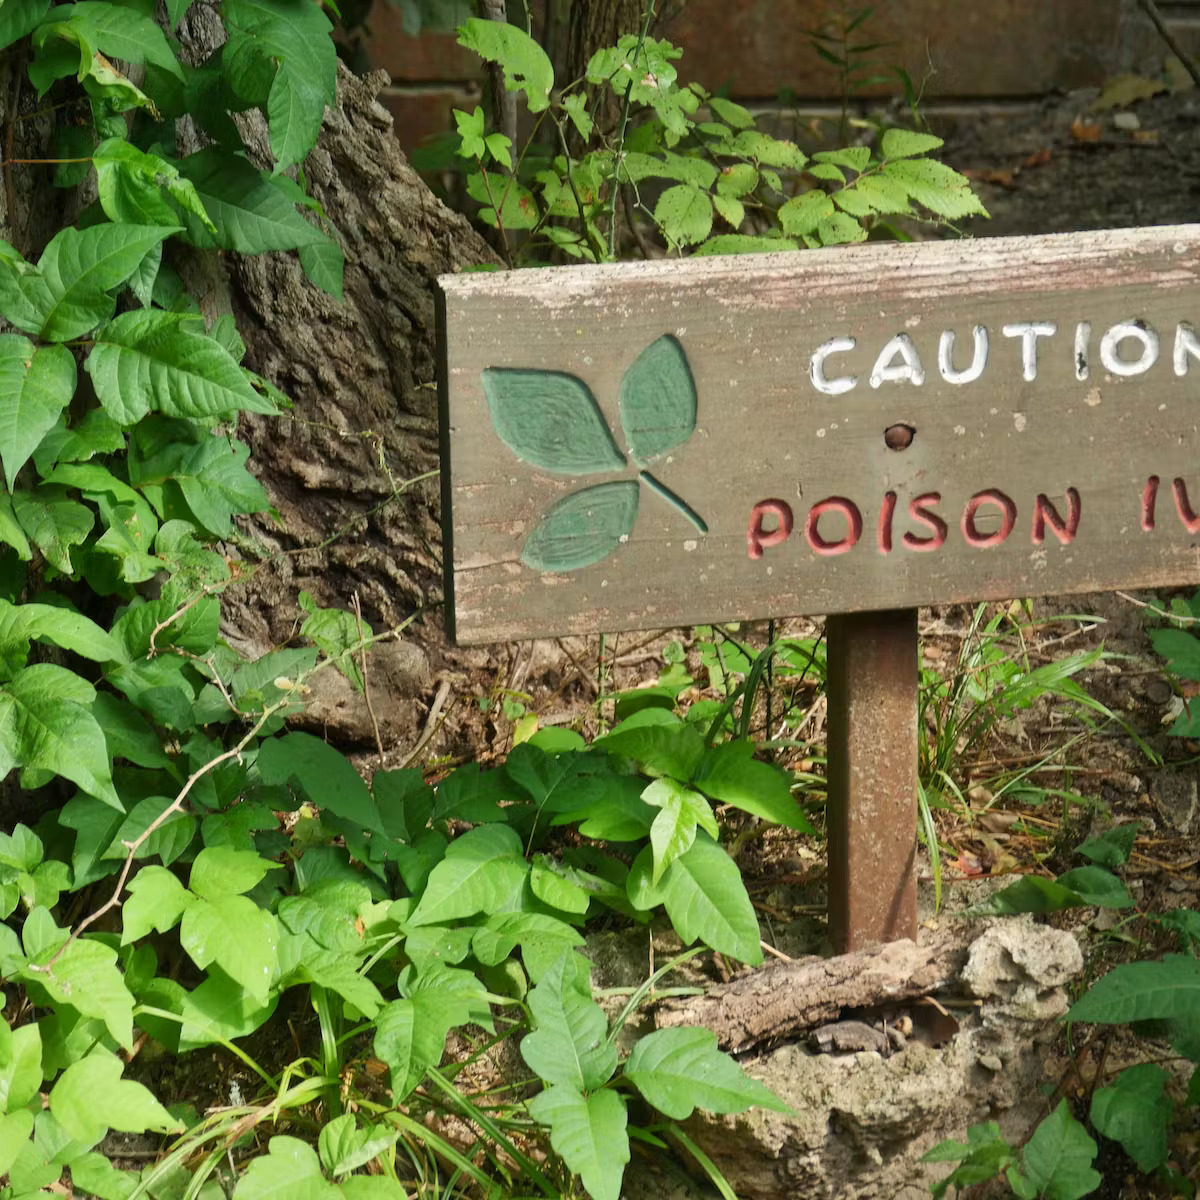 How To Get Rid Of Poison Ivy From Your Yard: 5 Effective Methods